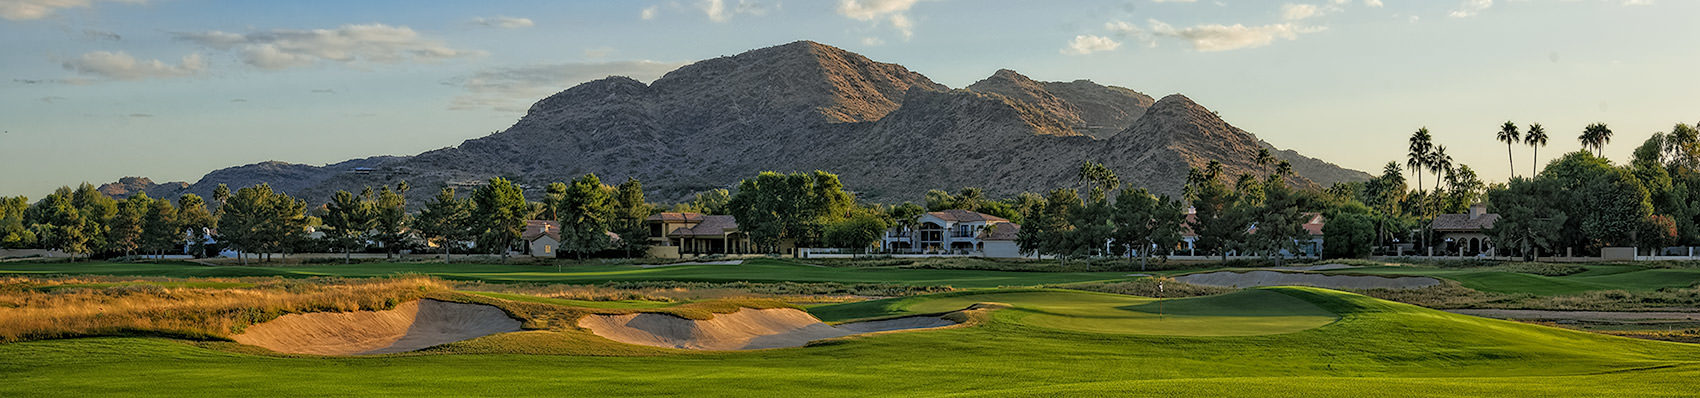 
        <div class='title'>
          Ambiente's 13th 
        </div>
       
        <div class='description'>
          JW Marriott Camelback Resort's Ambiente Course, 12th Hole, with Camelback Mountain in the background
        </div>
      